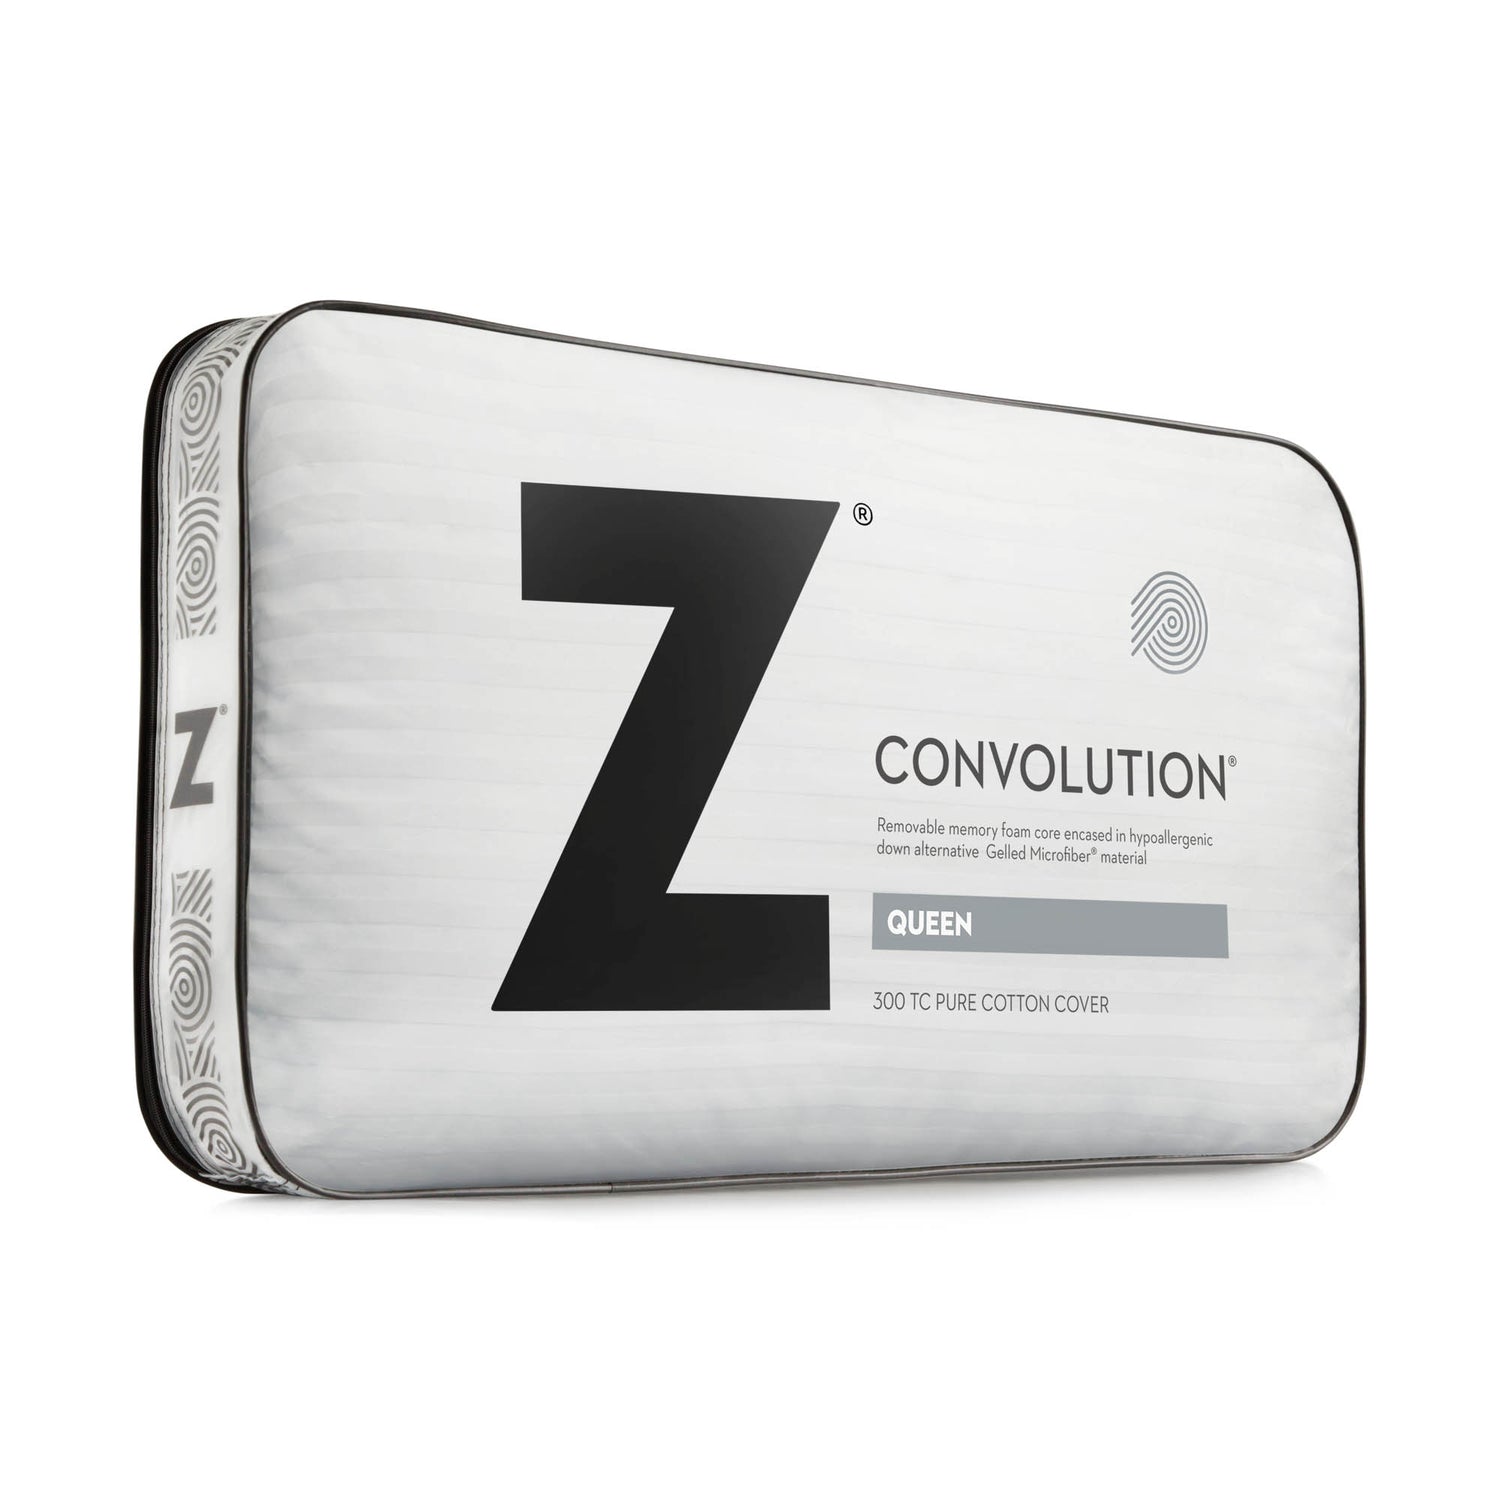 Convolution® Pillow packaged